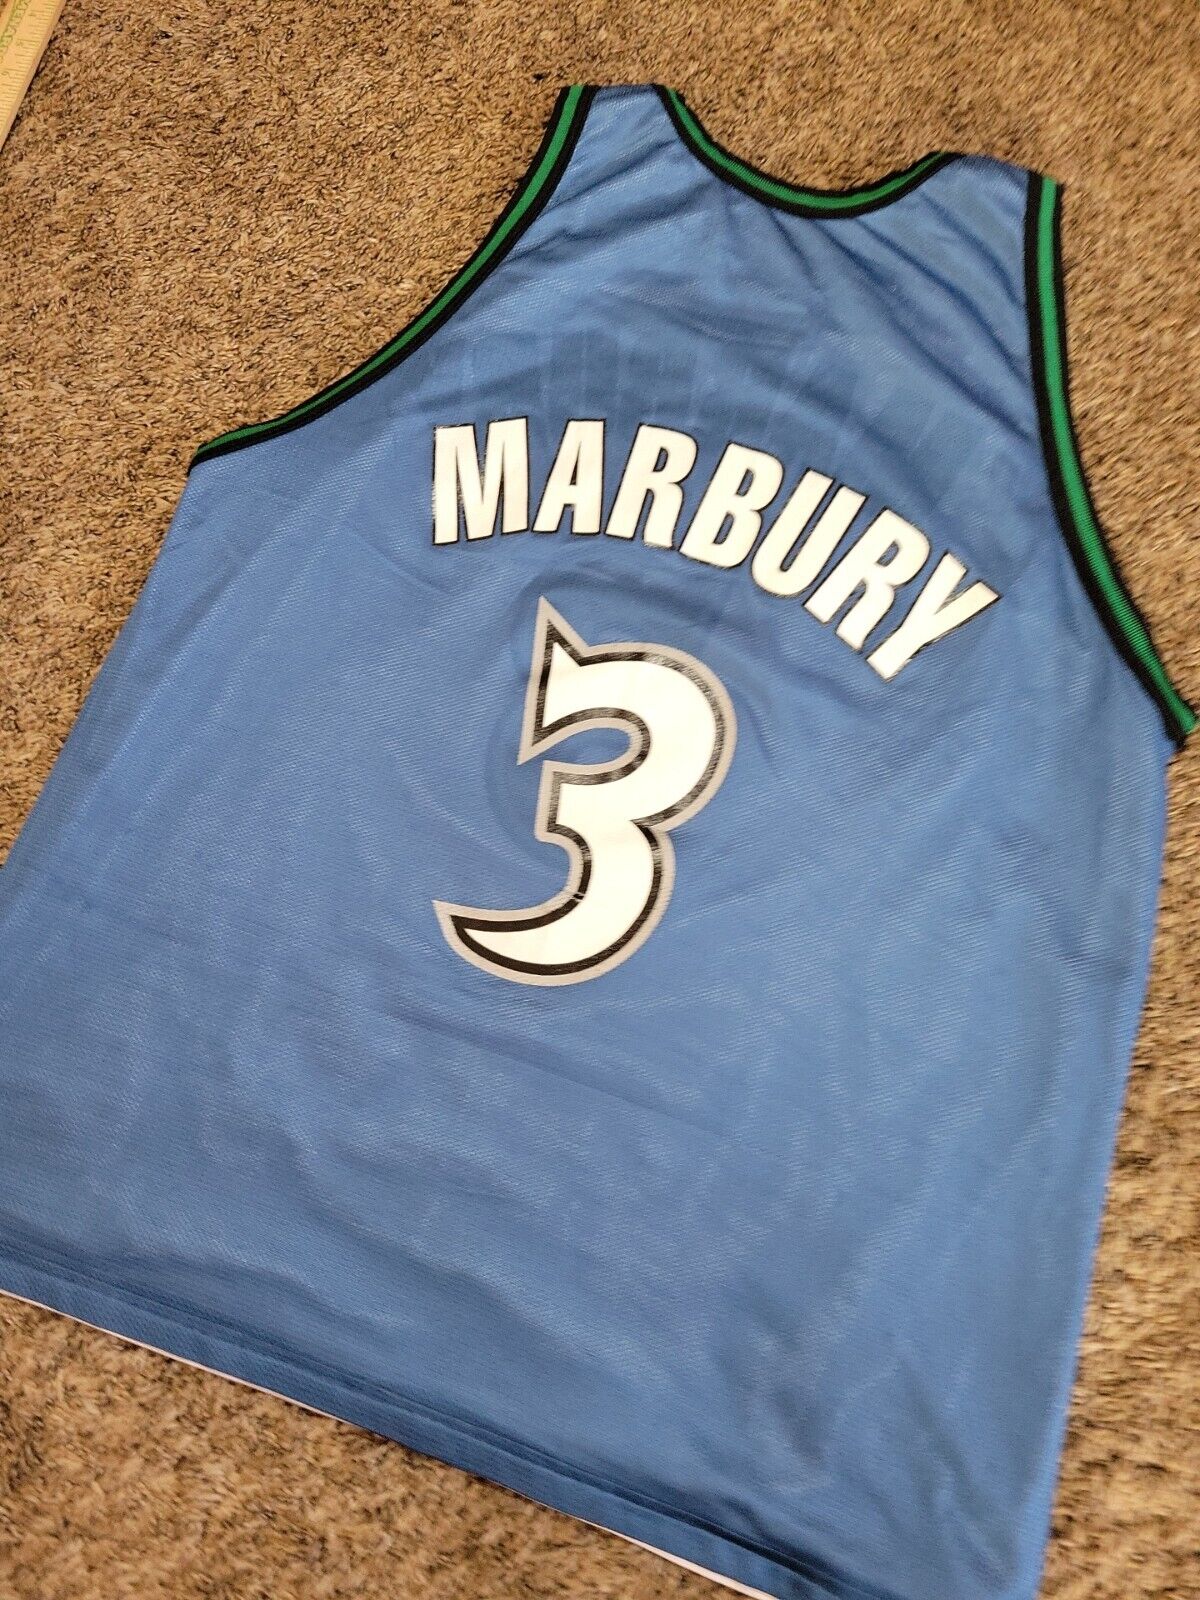 Vintage Stephon Marbury Minnesota Timberwolves Reversible Jersey NWT 90's  NBA basketball – For All To Envy